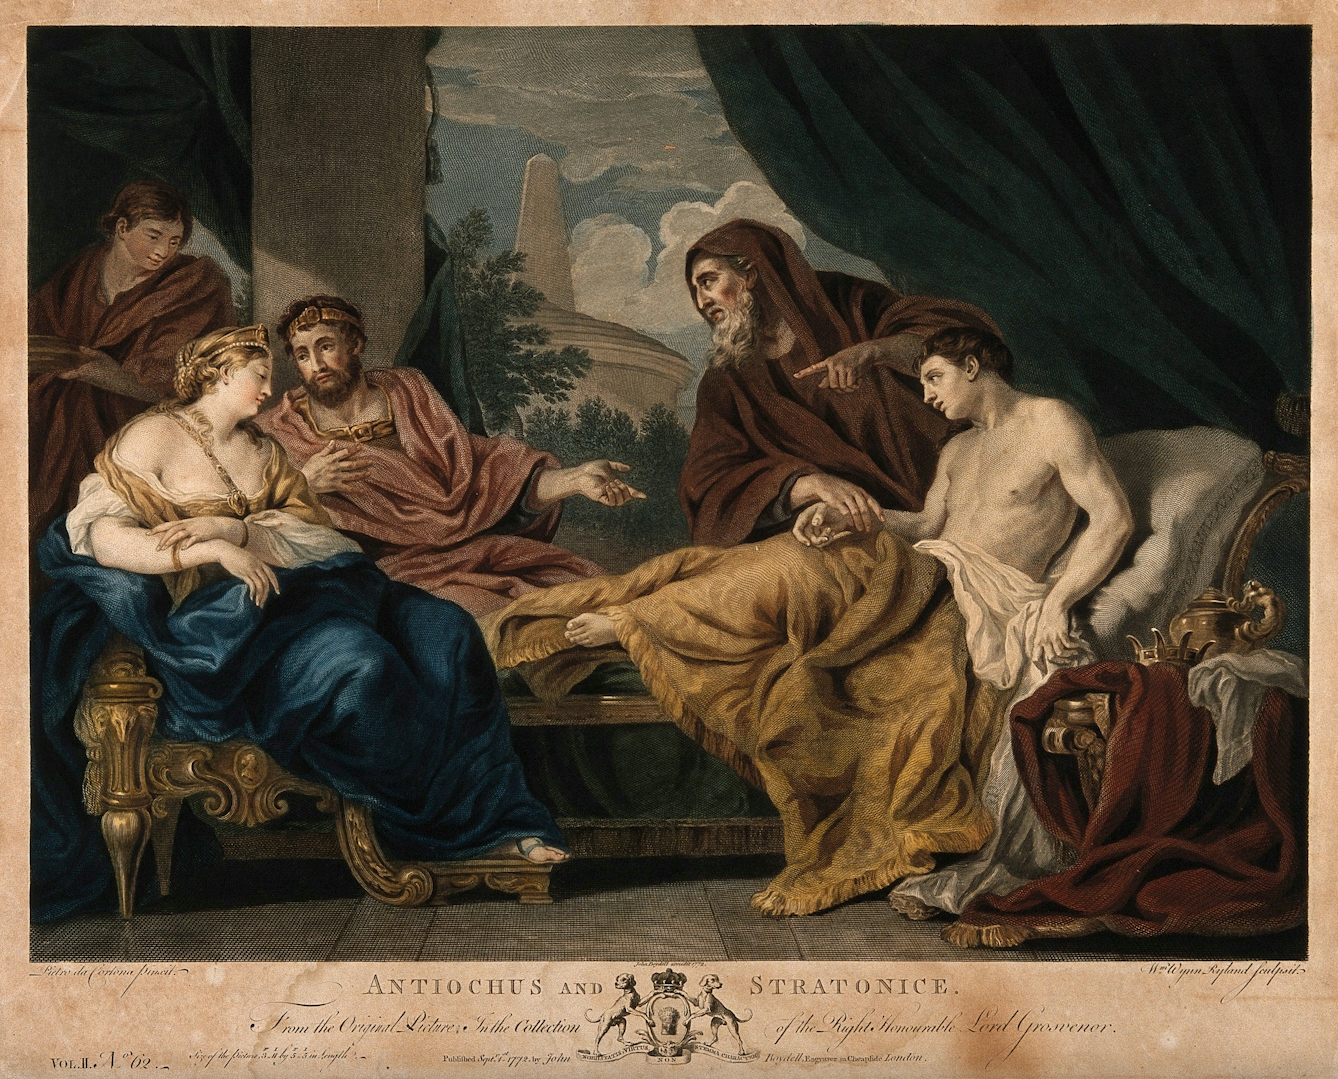 Etching painted in watercolours depicting the physician Erasistratus taking the pulse of a shirtless Antiochus, who is lying on a daybed gazing towards Stratonice. The doctor points at her to indicate that lovesickness for her is the cause of Antiochus' poor health. 